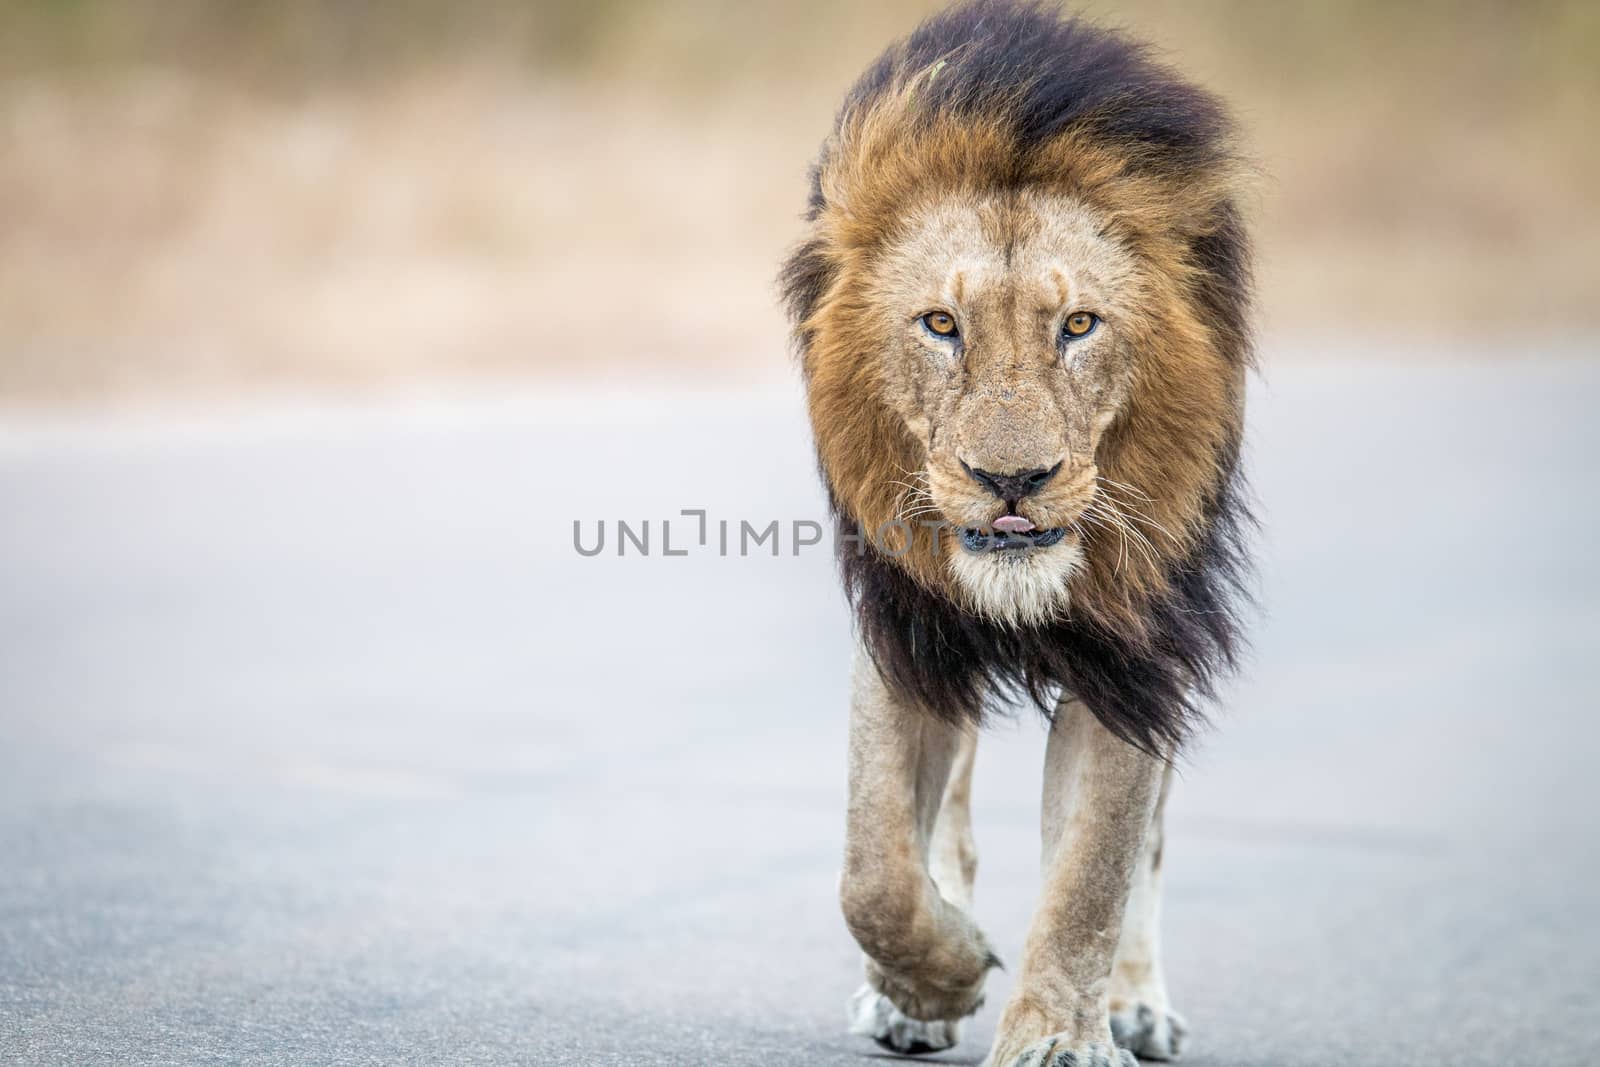 Male Lion walking towards the camera in the Kruger National Park, South Africa.